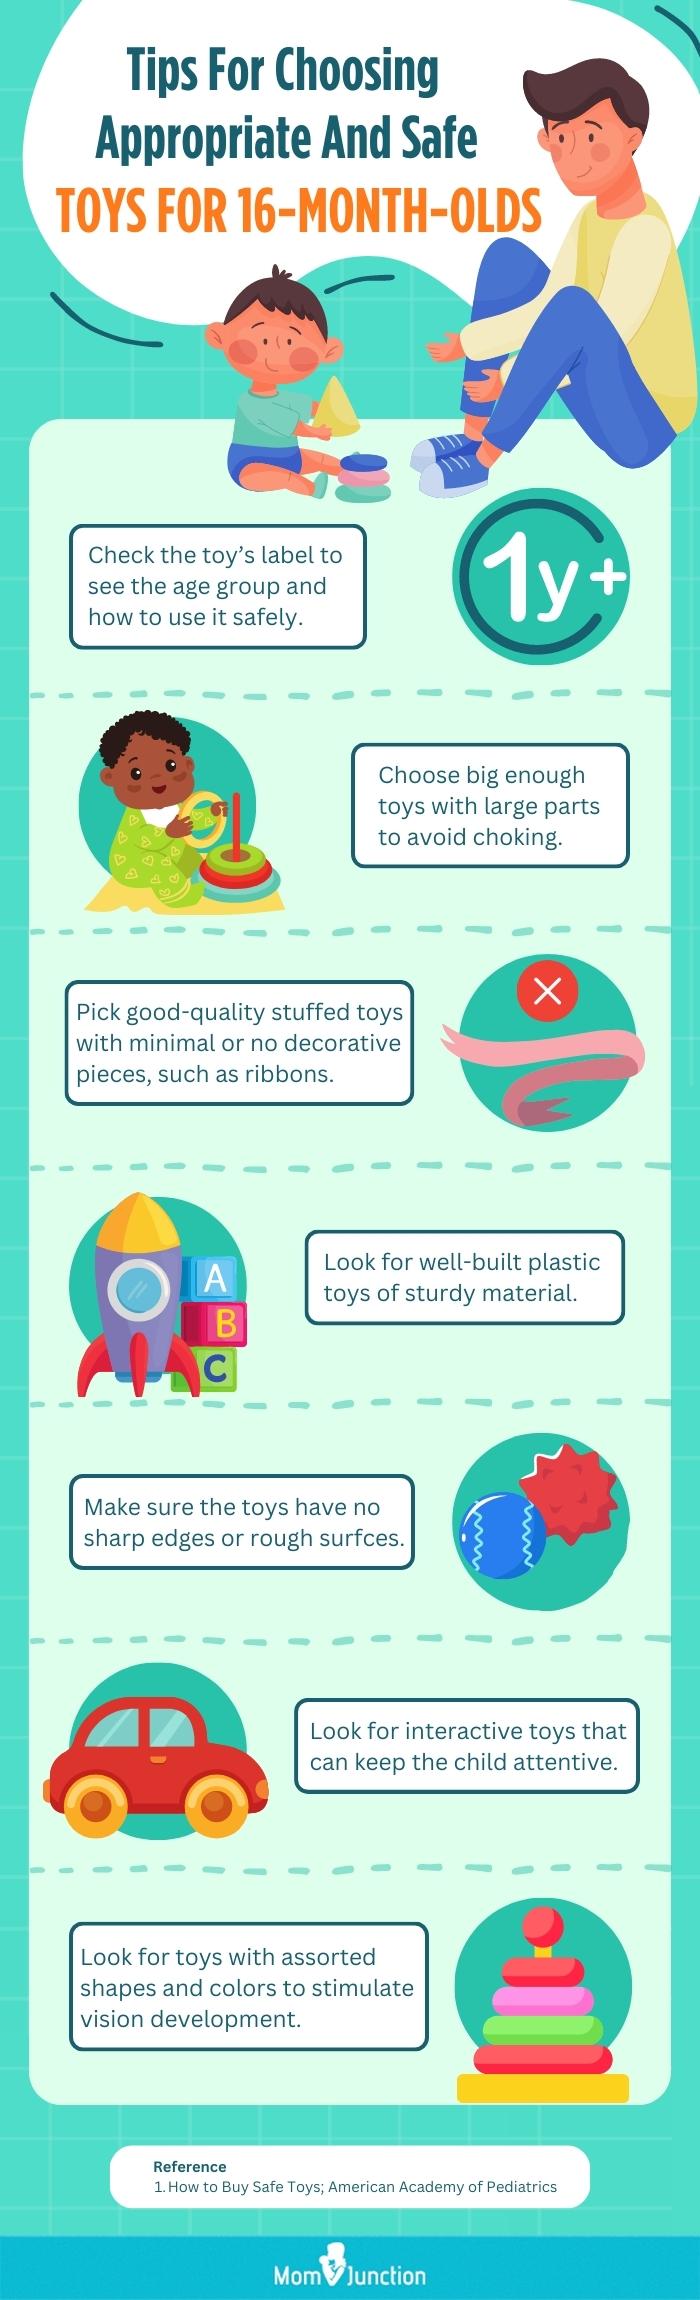 Tips For Choosing Appropriate And Safe Toys For 16-Month-Olds (infographic)